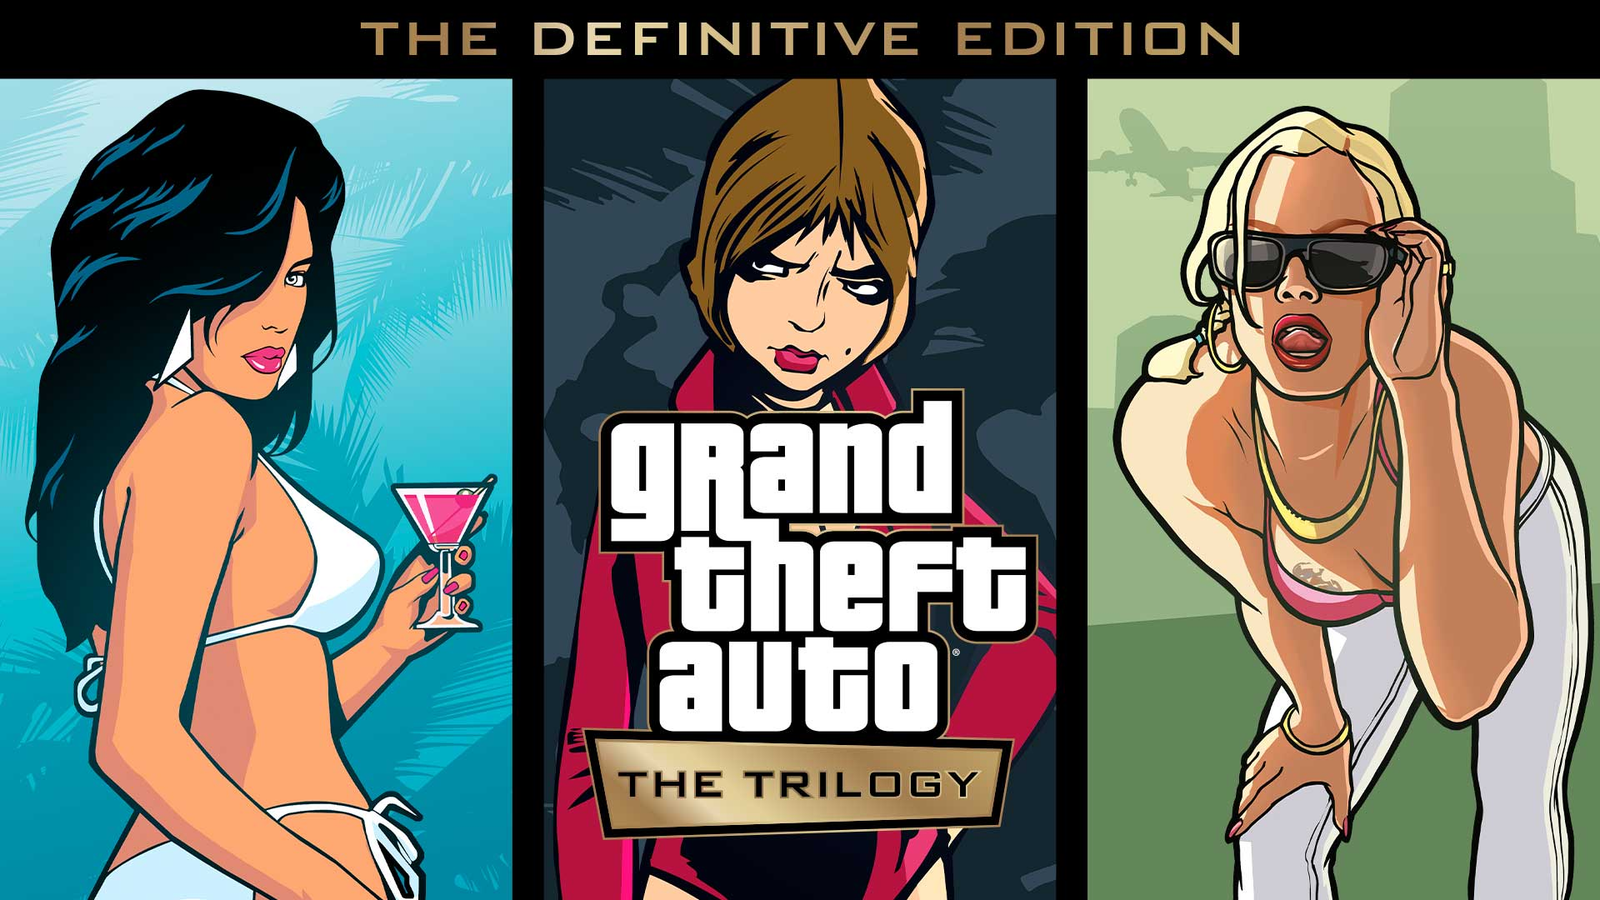 GTA Vice City Cheats for PC, PS4, PS5, Xbox One And Xbox Series X